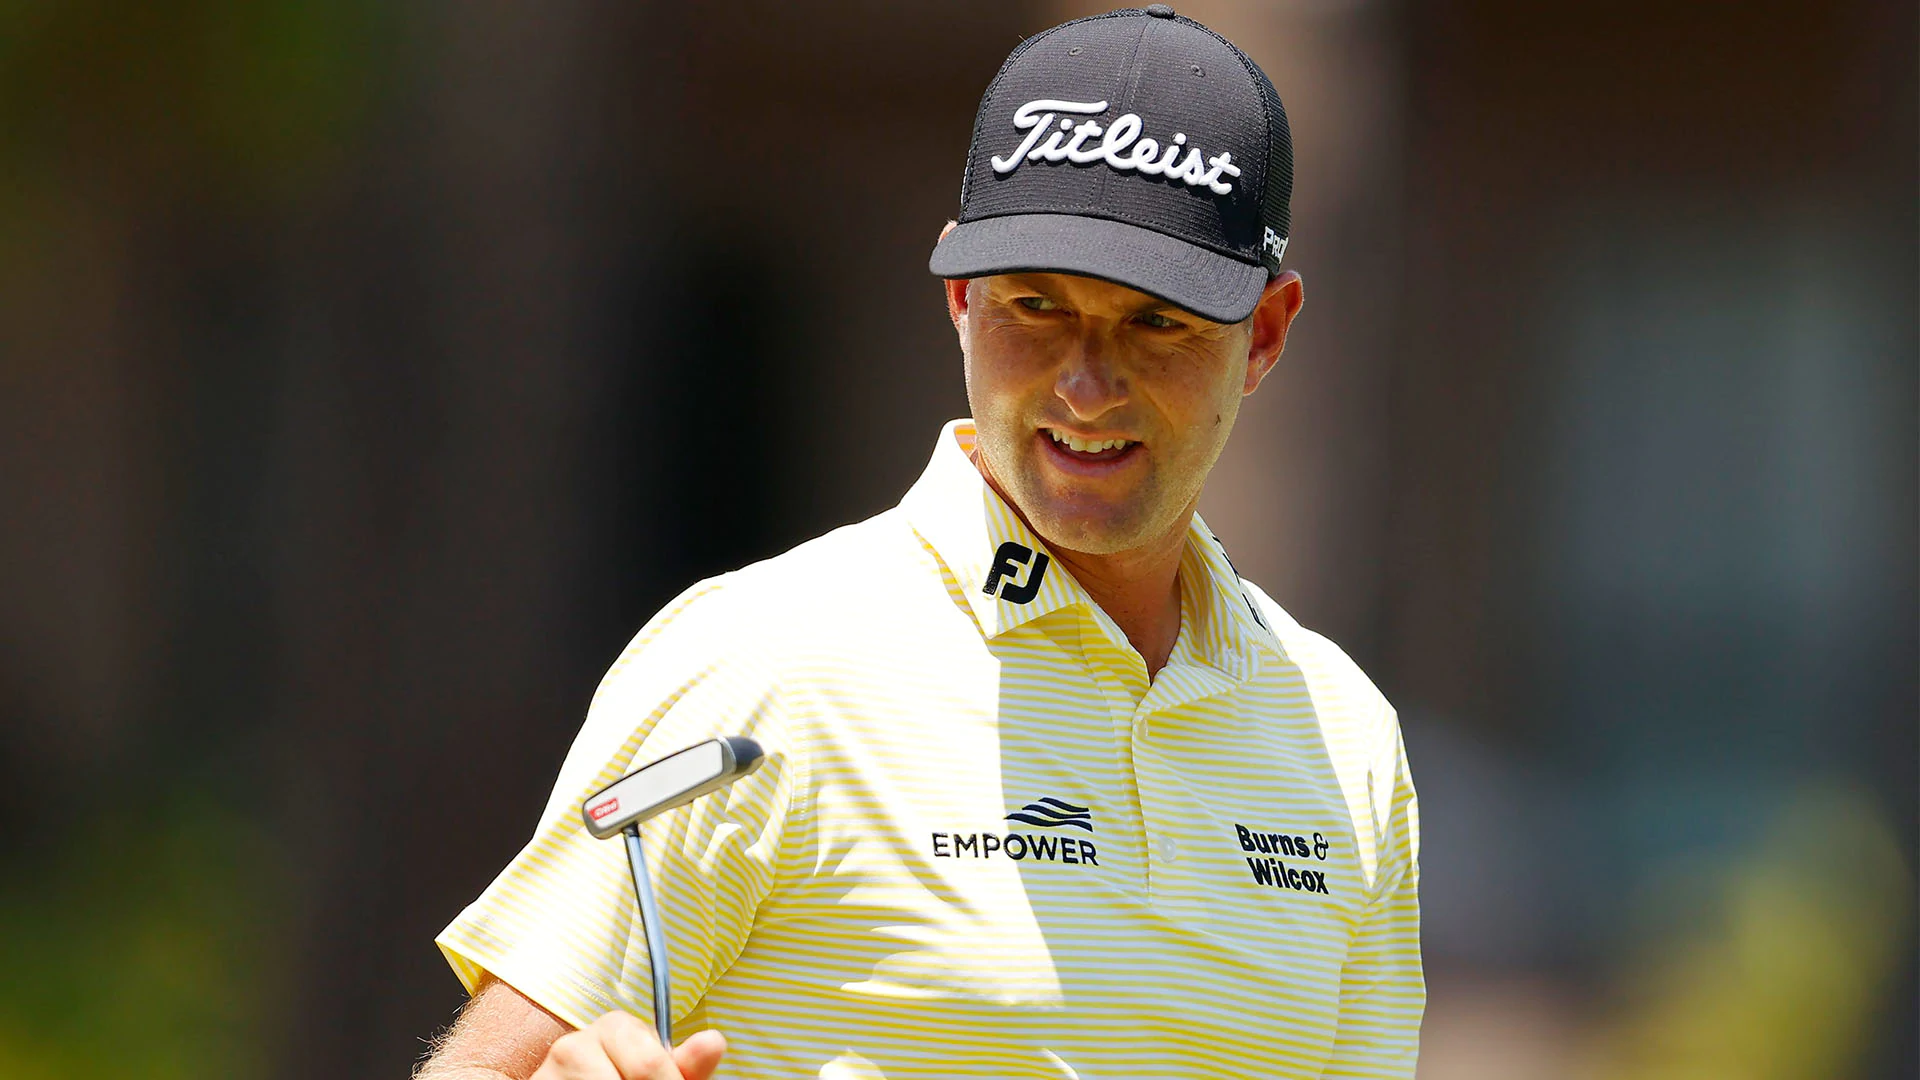 After withdrawing from Travelers, Webb Simpson commits to Rocket Mortgage Classic